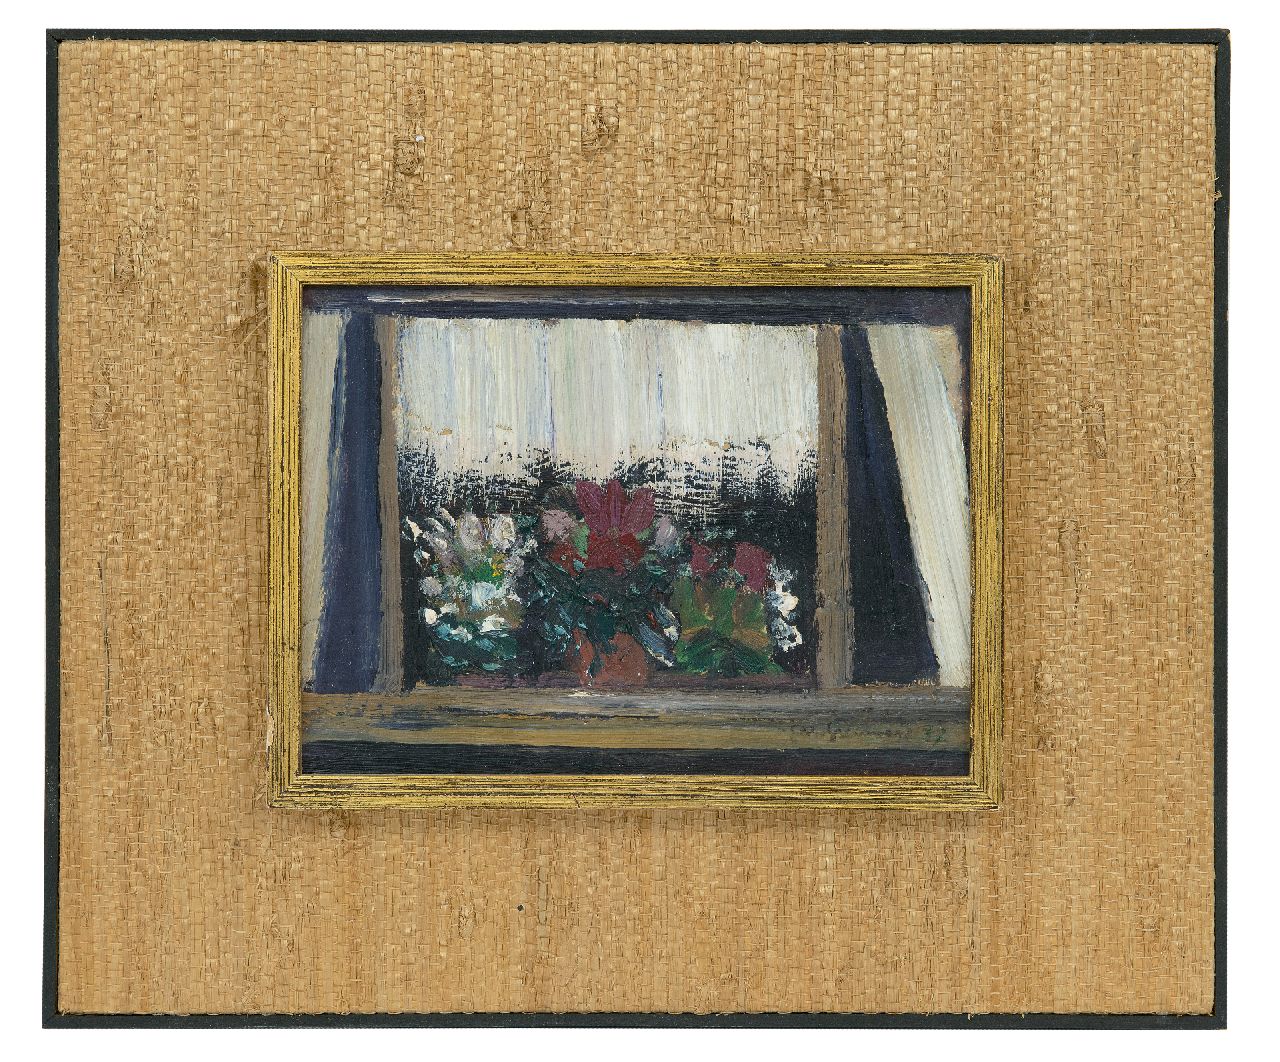 Grassère G.  | Gérard Grassère, Flowers in a window, oil on board 15.3 x 20.4 cm, signed l.r. and dated '37